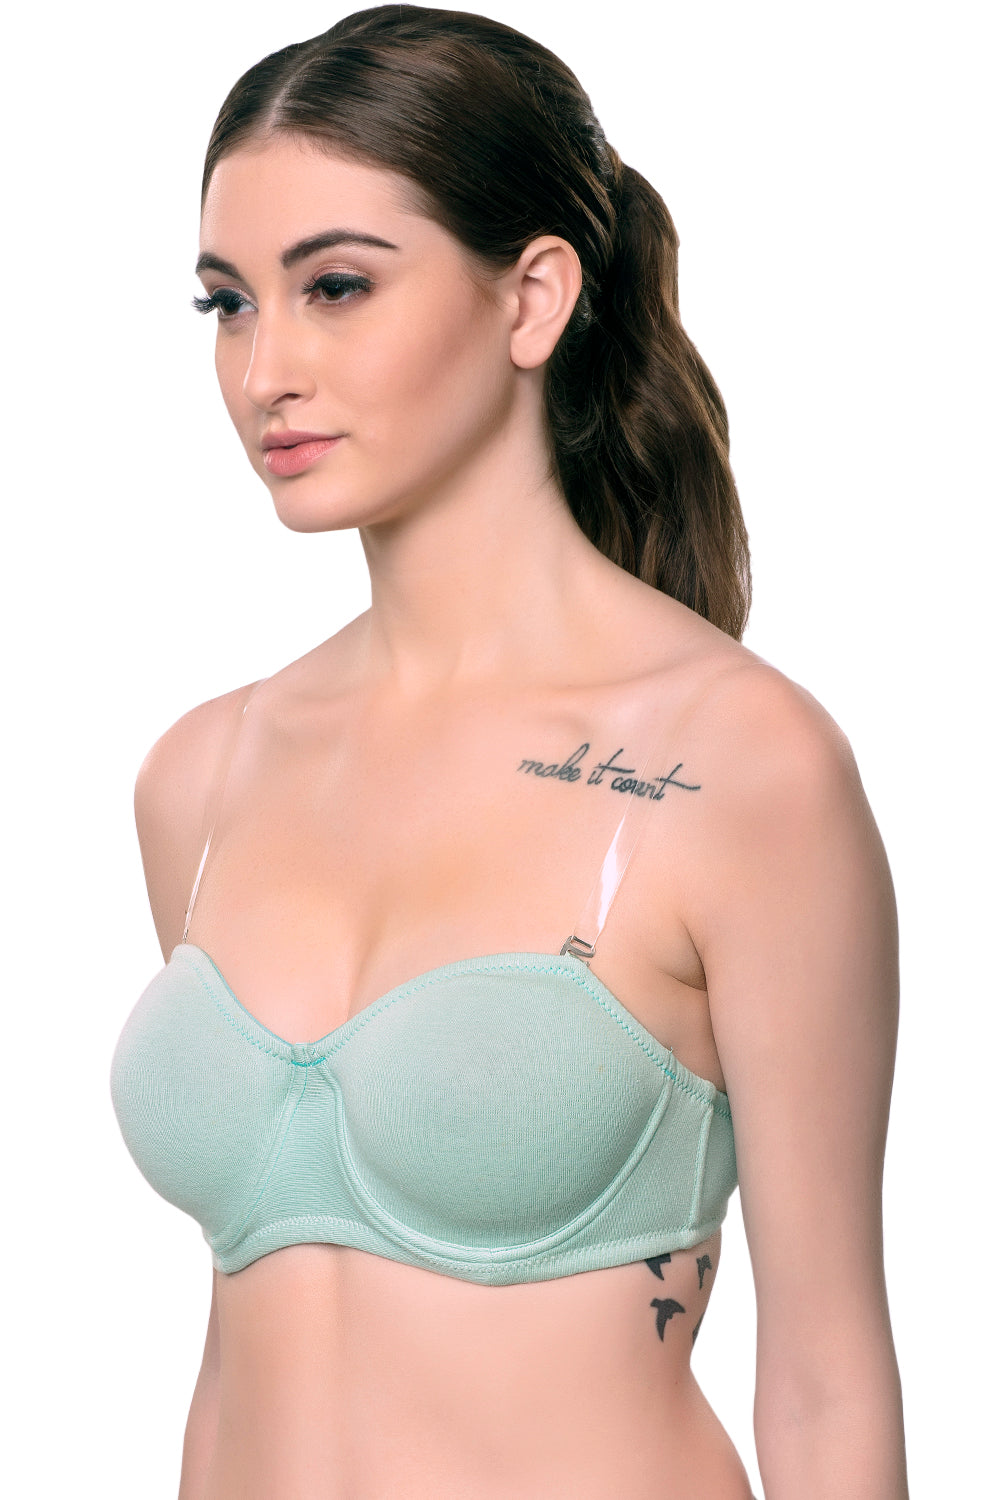 How to choose the perfect strapless bra – Inner Sense